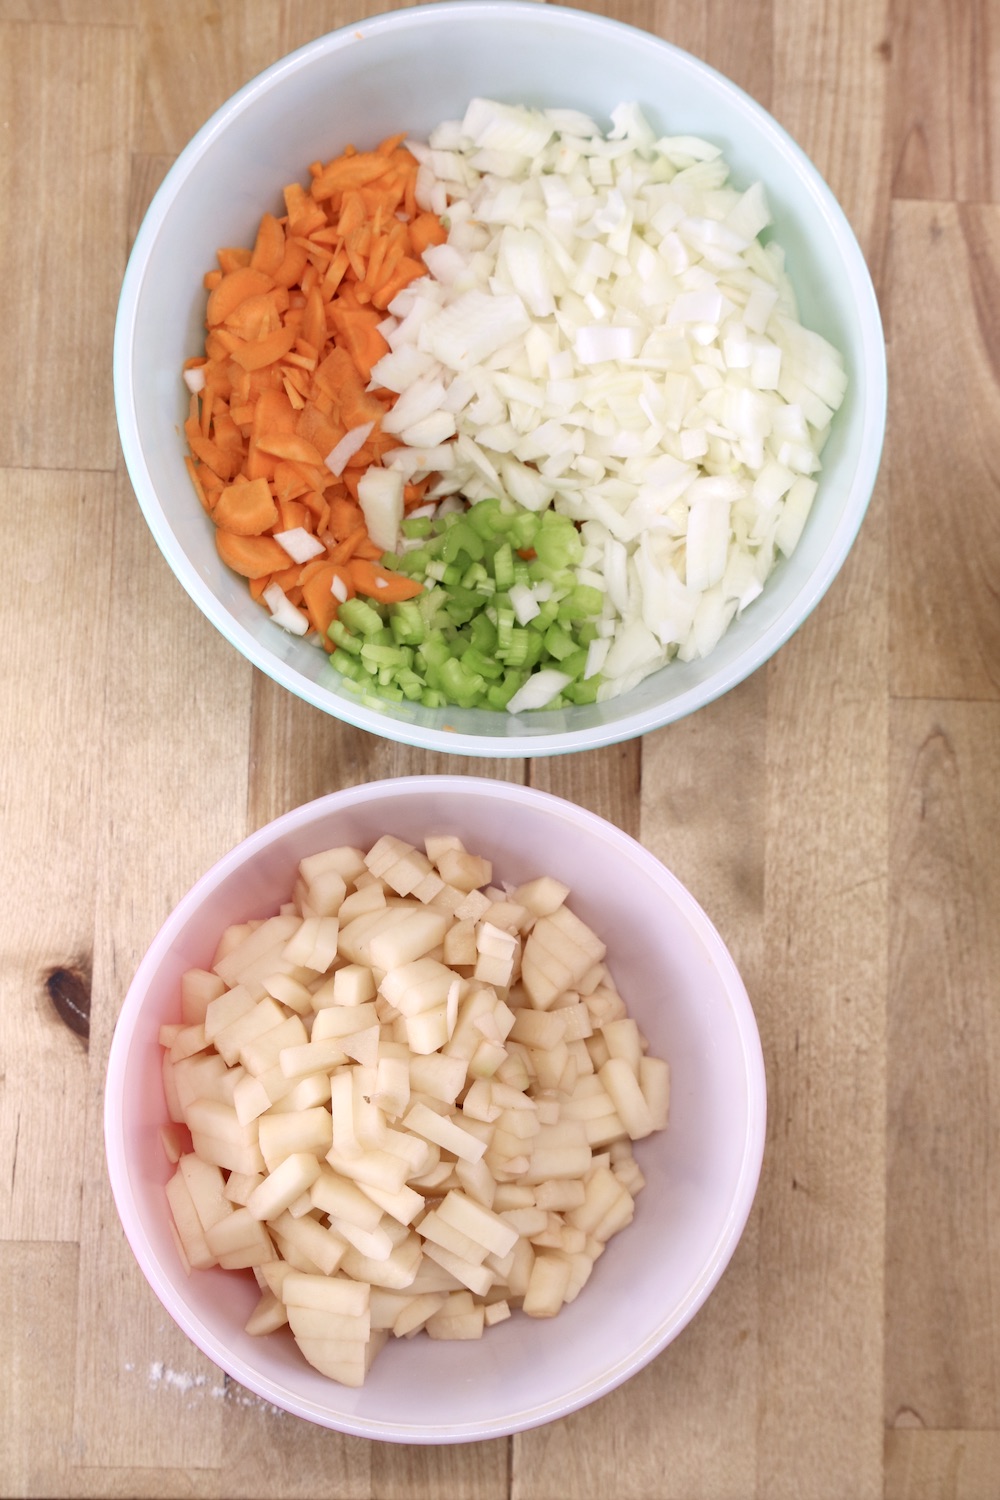 Bowl of diced carrots, celery, onions. Bowl of diced potatoes